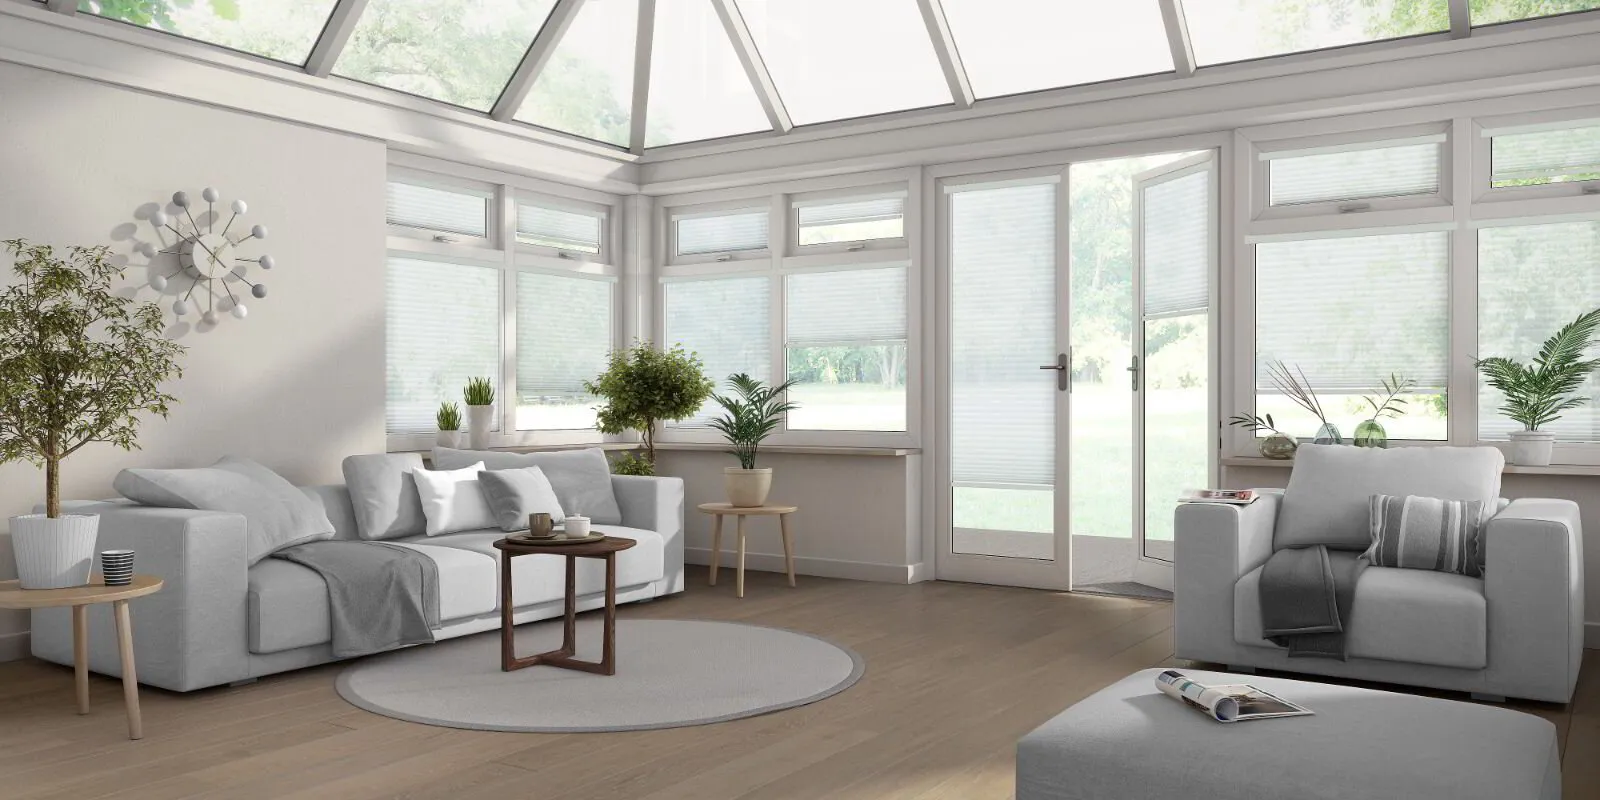 Factors to Consider When Choosing Blinds for a Conservatory